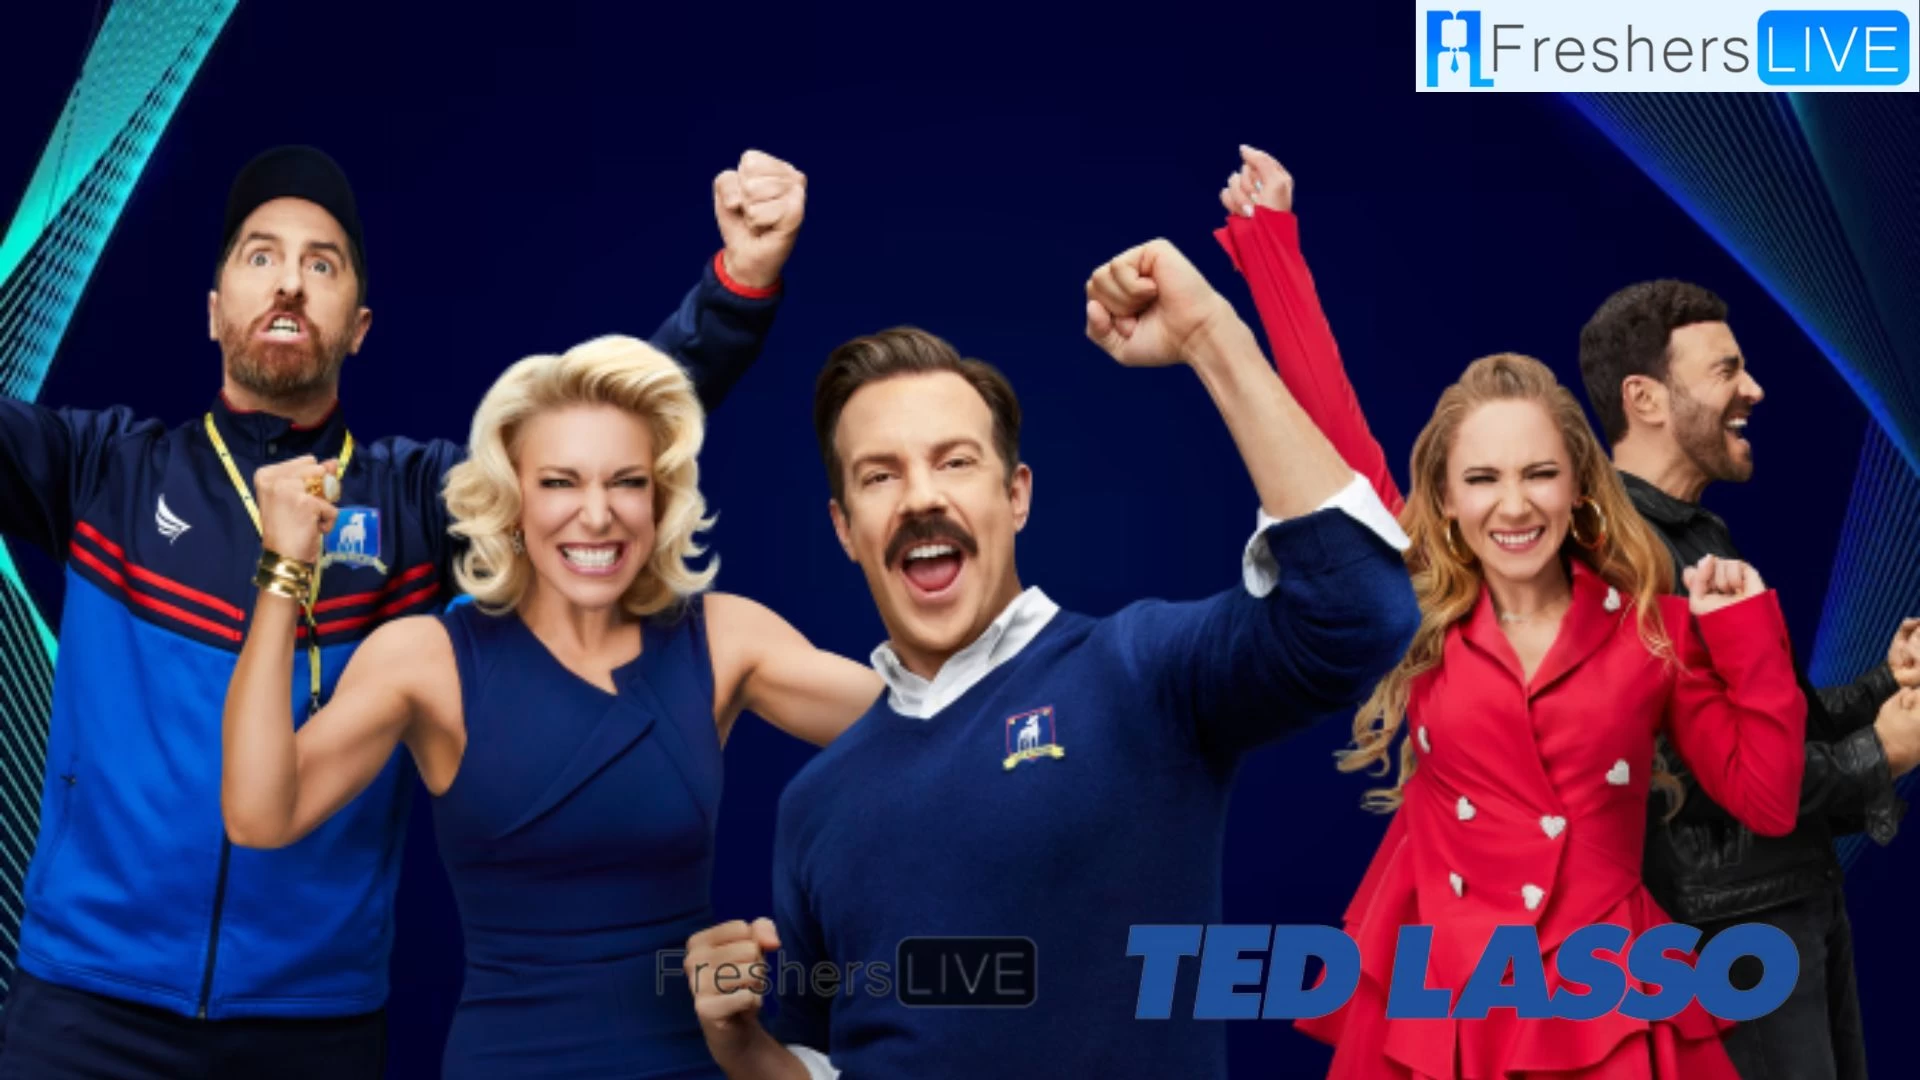 Will There be a Season 4 of Ted Lasso? When is Ted Lasso Season 4 Coming Out? Ted Lasso Season 4 Release Date